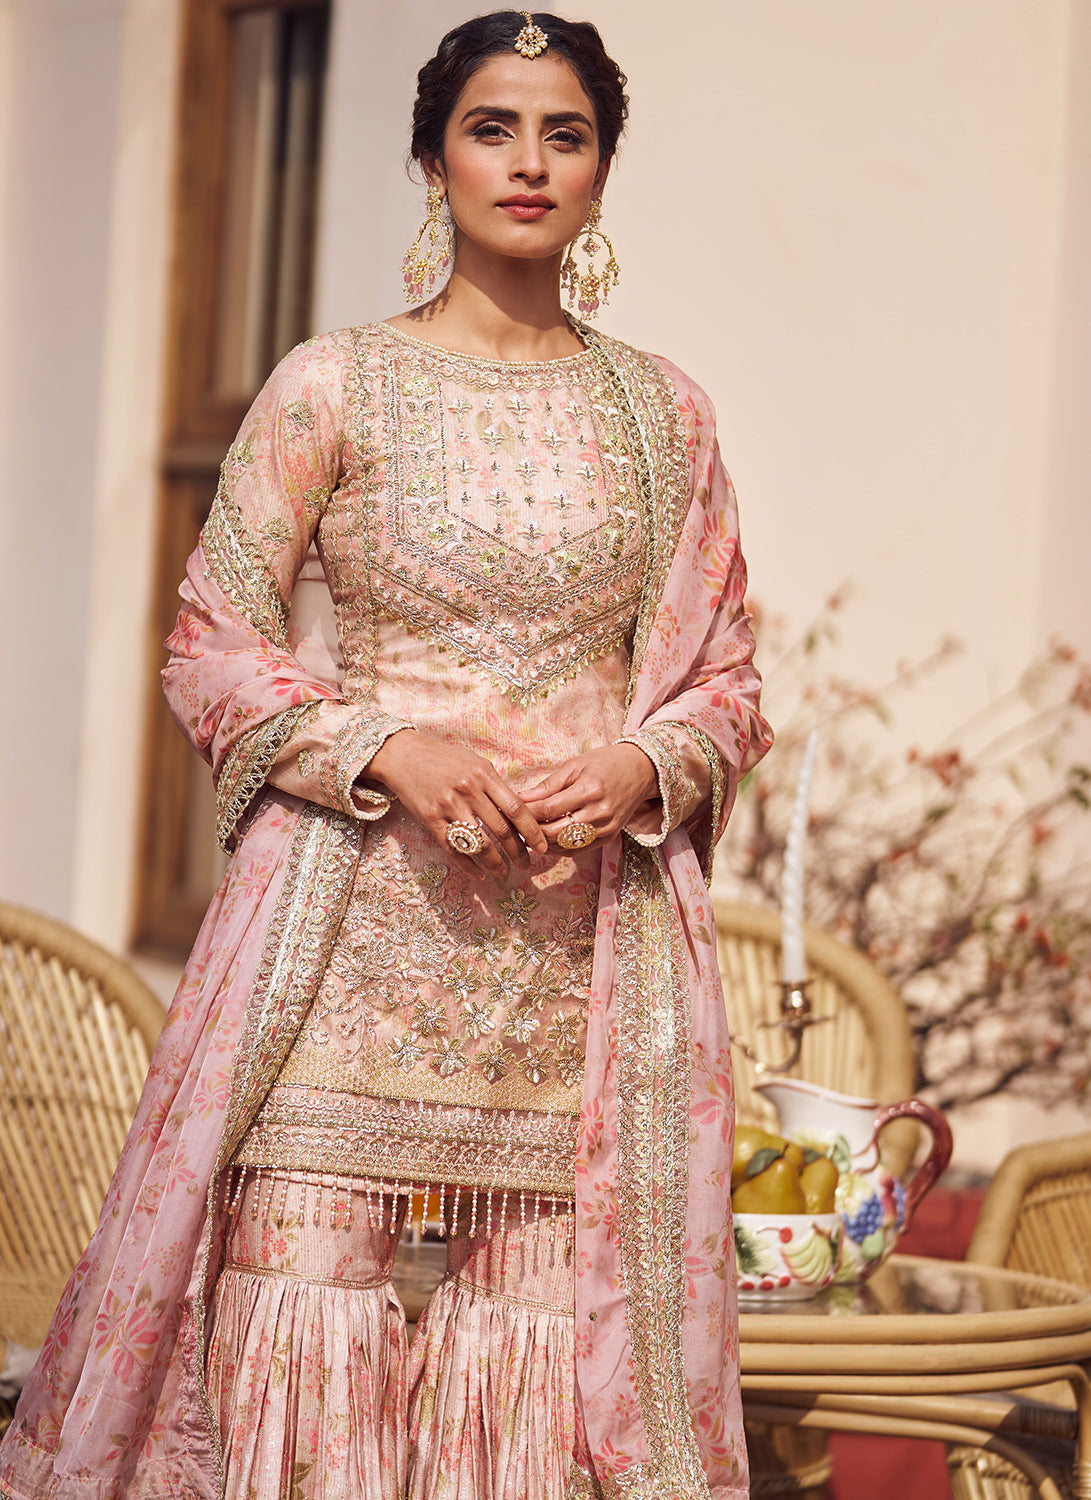 Blush Peach Floral Embroidered Gharara Suit